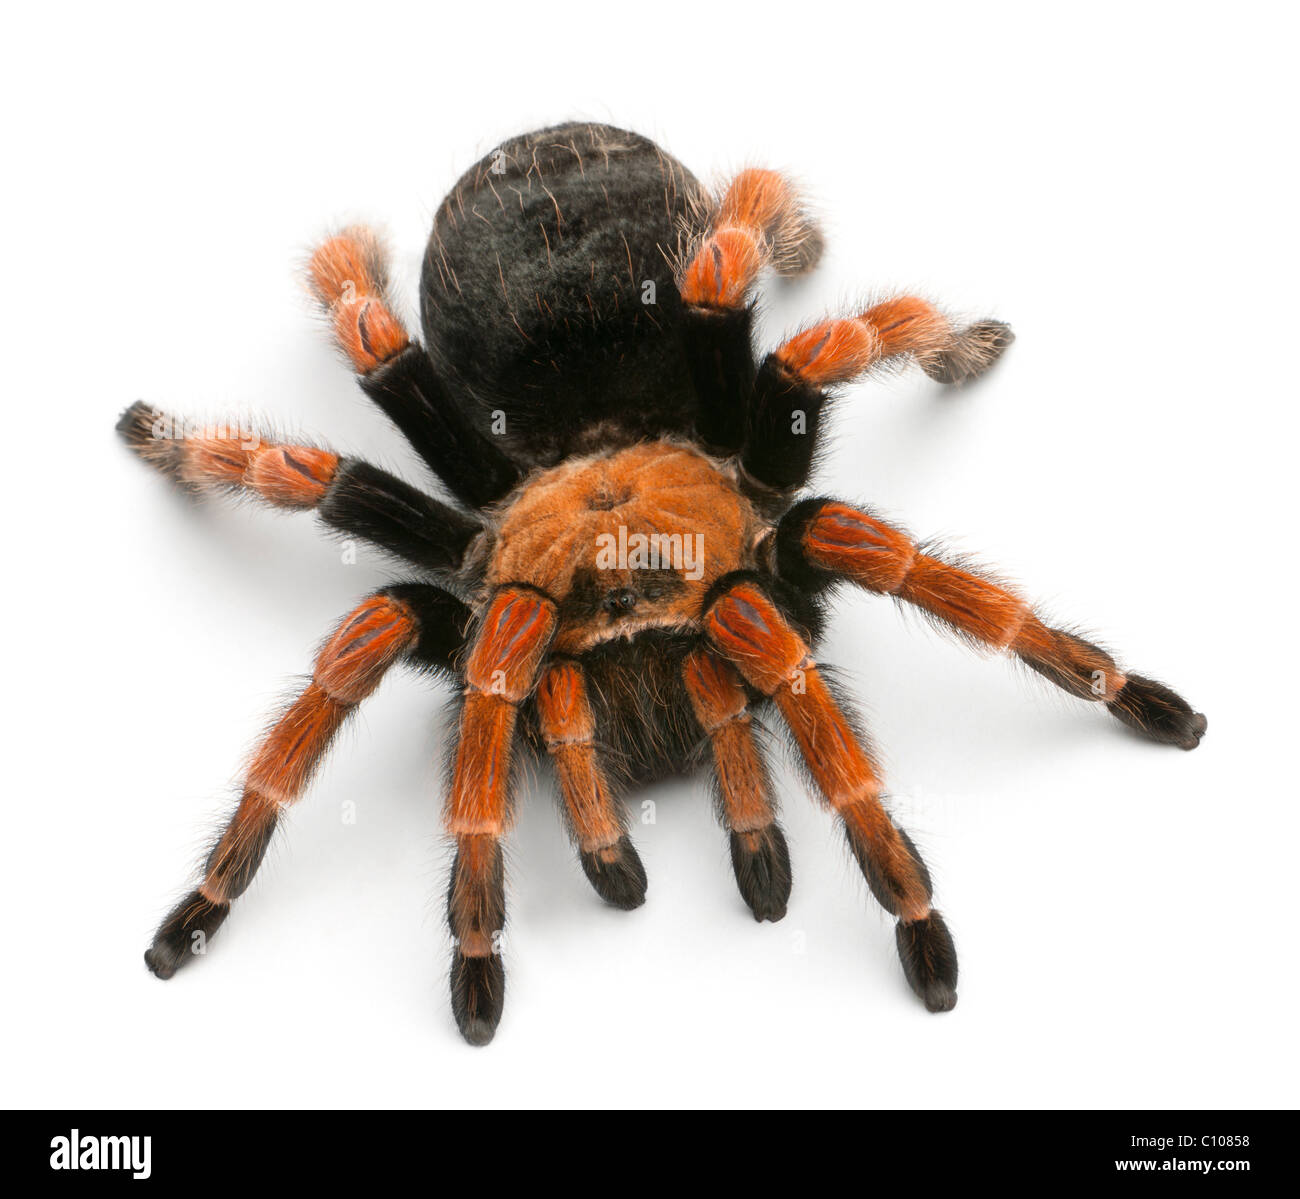 Tarantula spider, Brachypelma Boehmei, in front of white background Banque D'Images